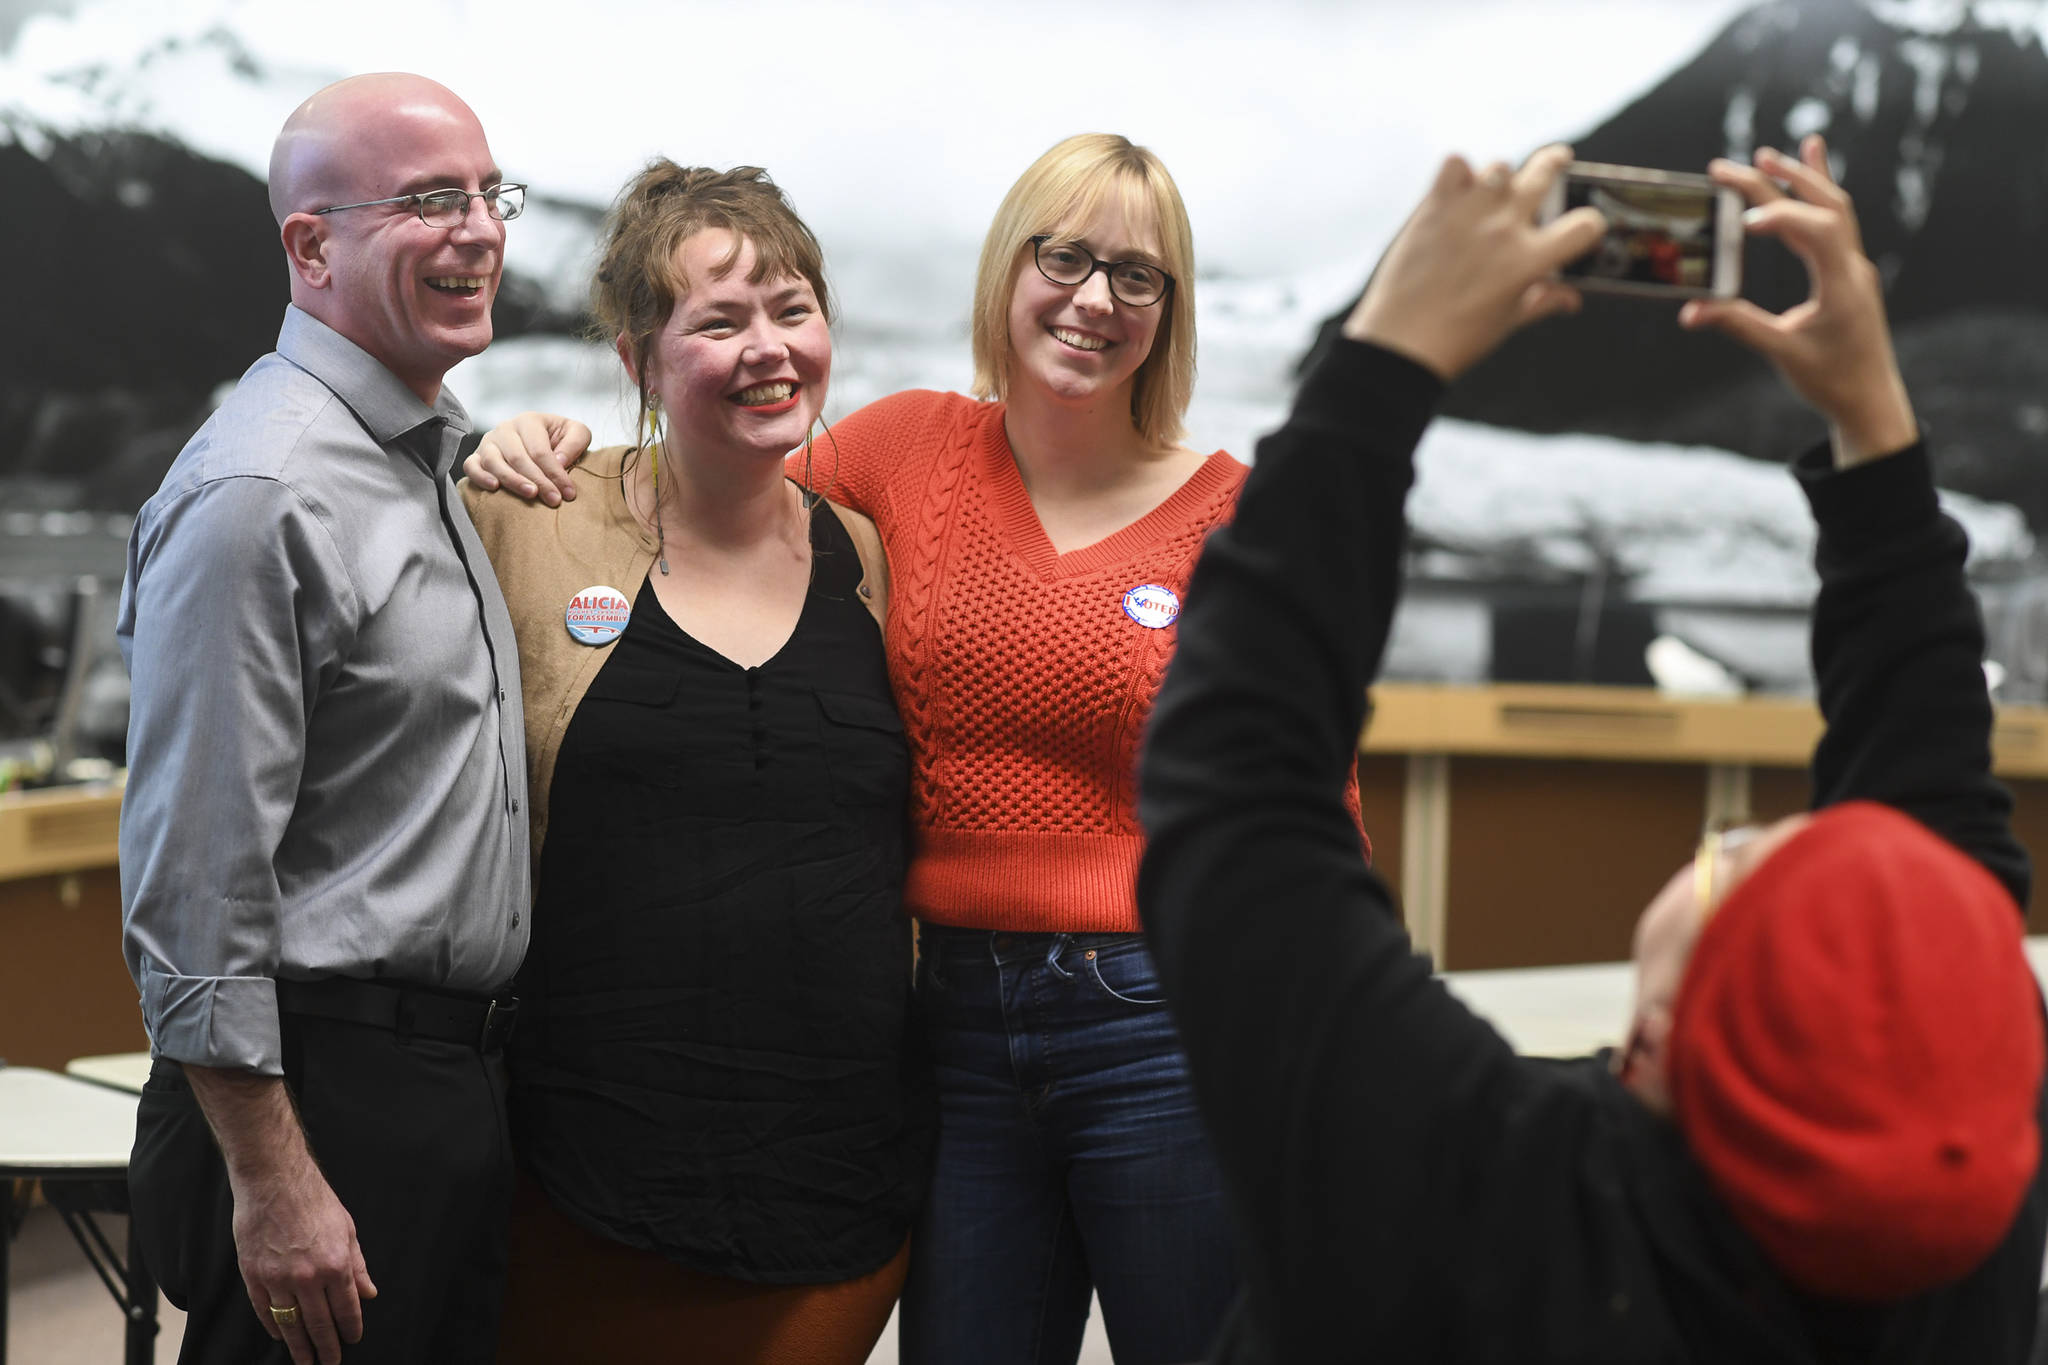 Kirsa Hughes-Skandijs takes a picture of her sister, Alicia Hughes-Skandijs, center, with Wade Bryson and Carole Triem as results come in at City Hall on Tuesday, Oct. 1, 2019. (Michael Penn | Juneau Empire)